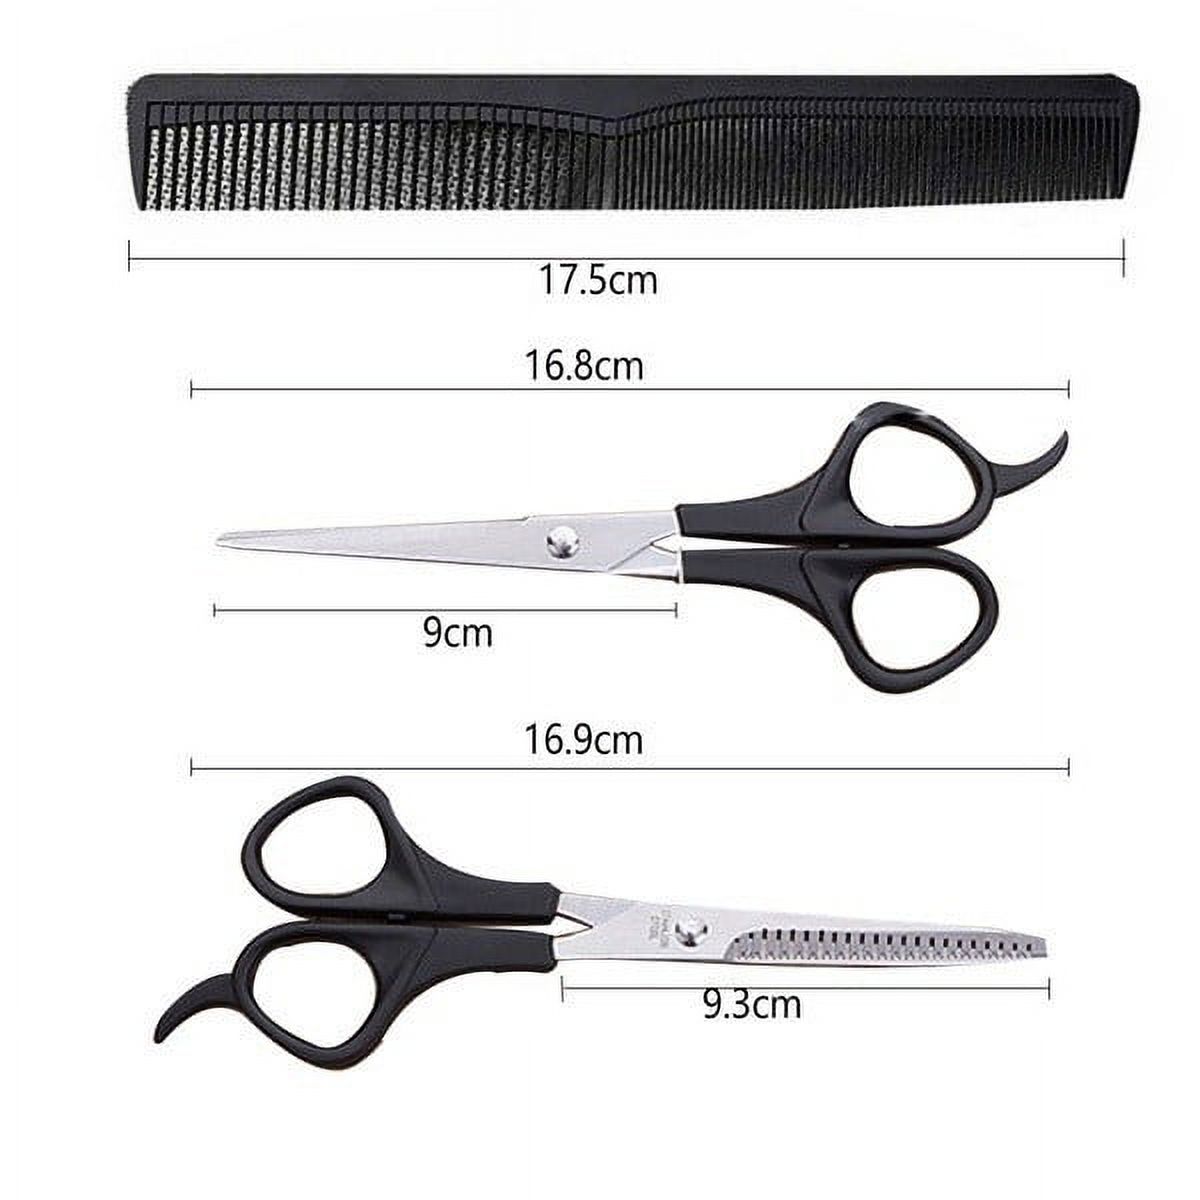 Willstar 3/9pcs Hair Cutting Scissors Set Professional Stainless Steel Barber Thinning Scissors for Barber Salon and Home - image 15 of 16